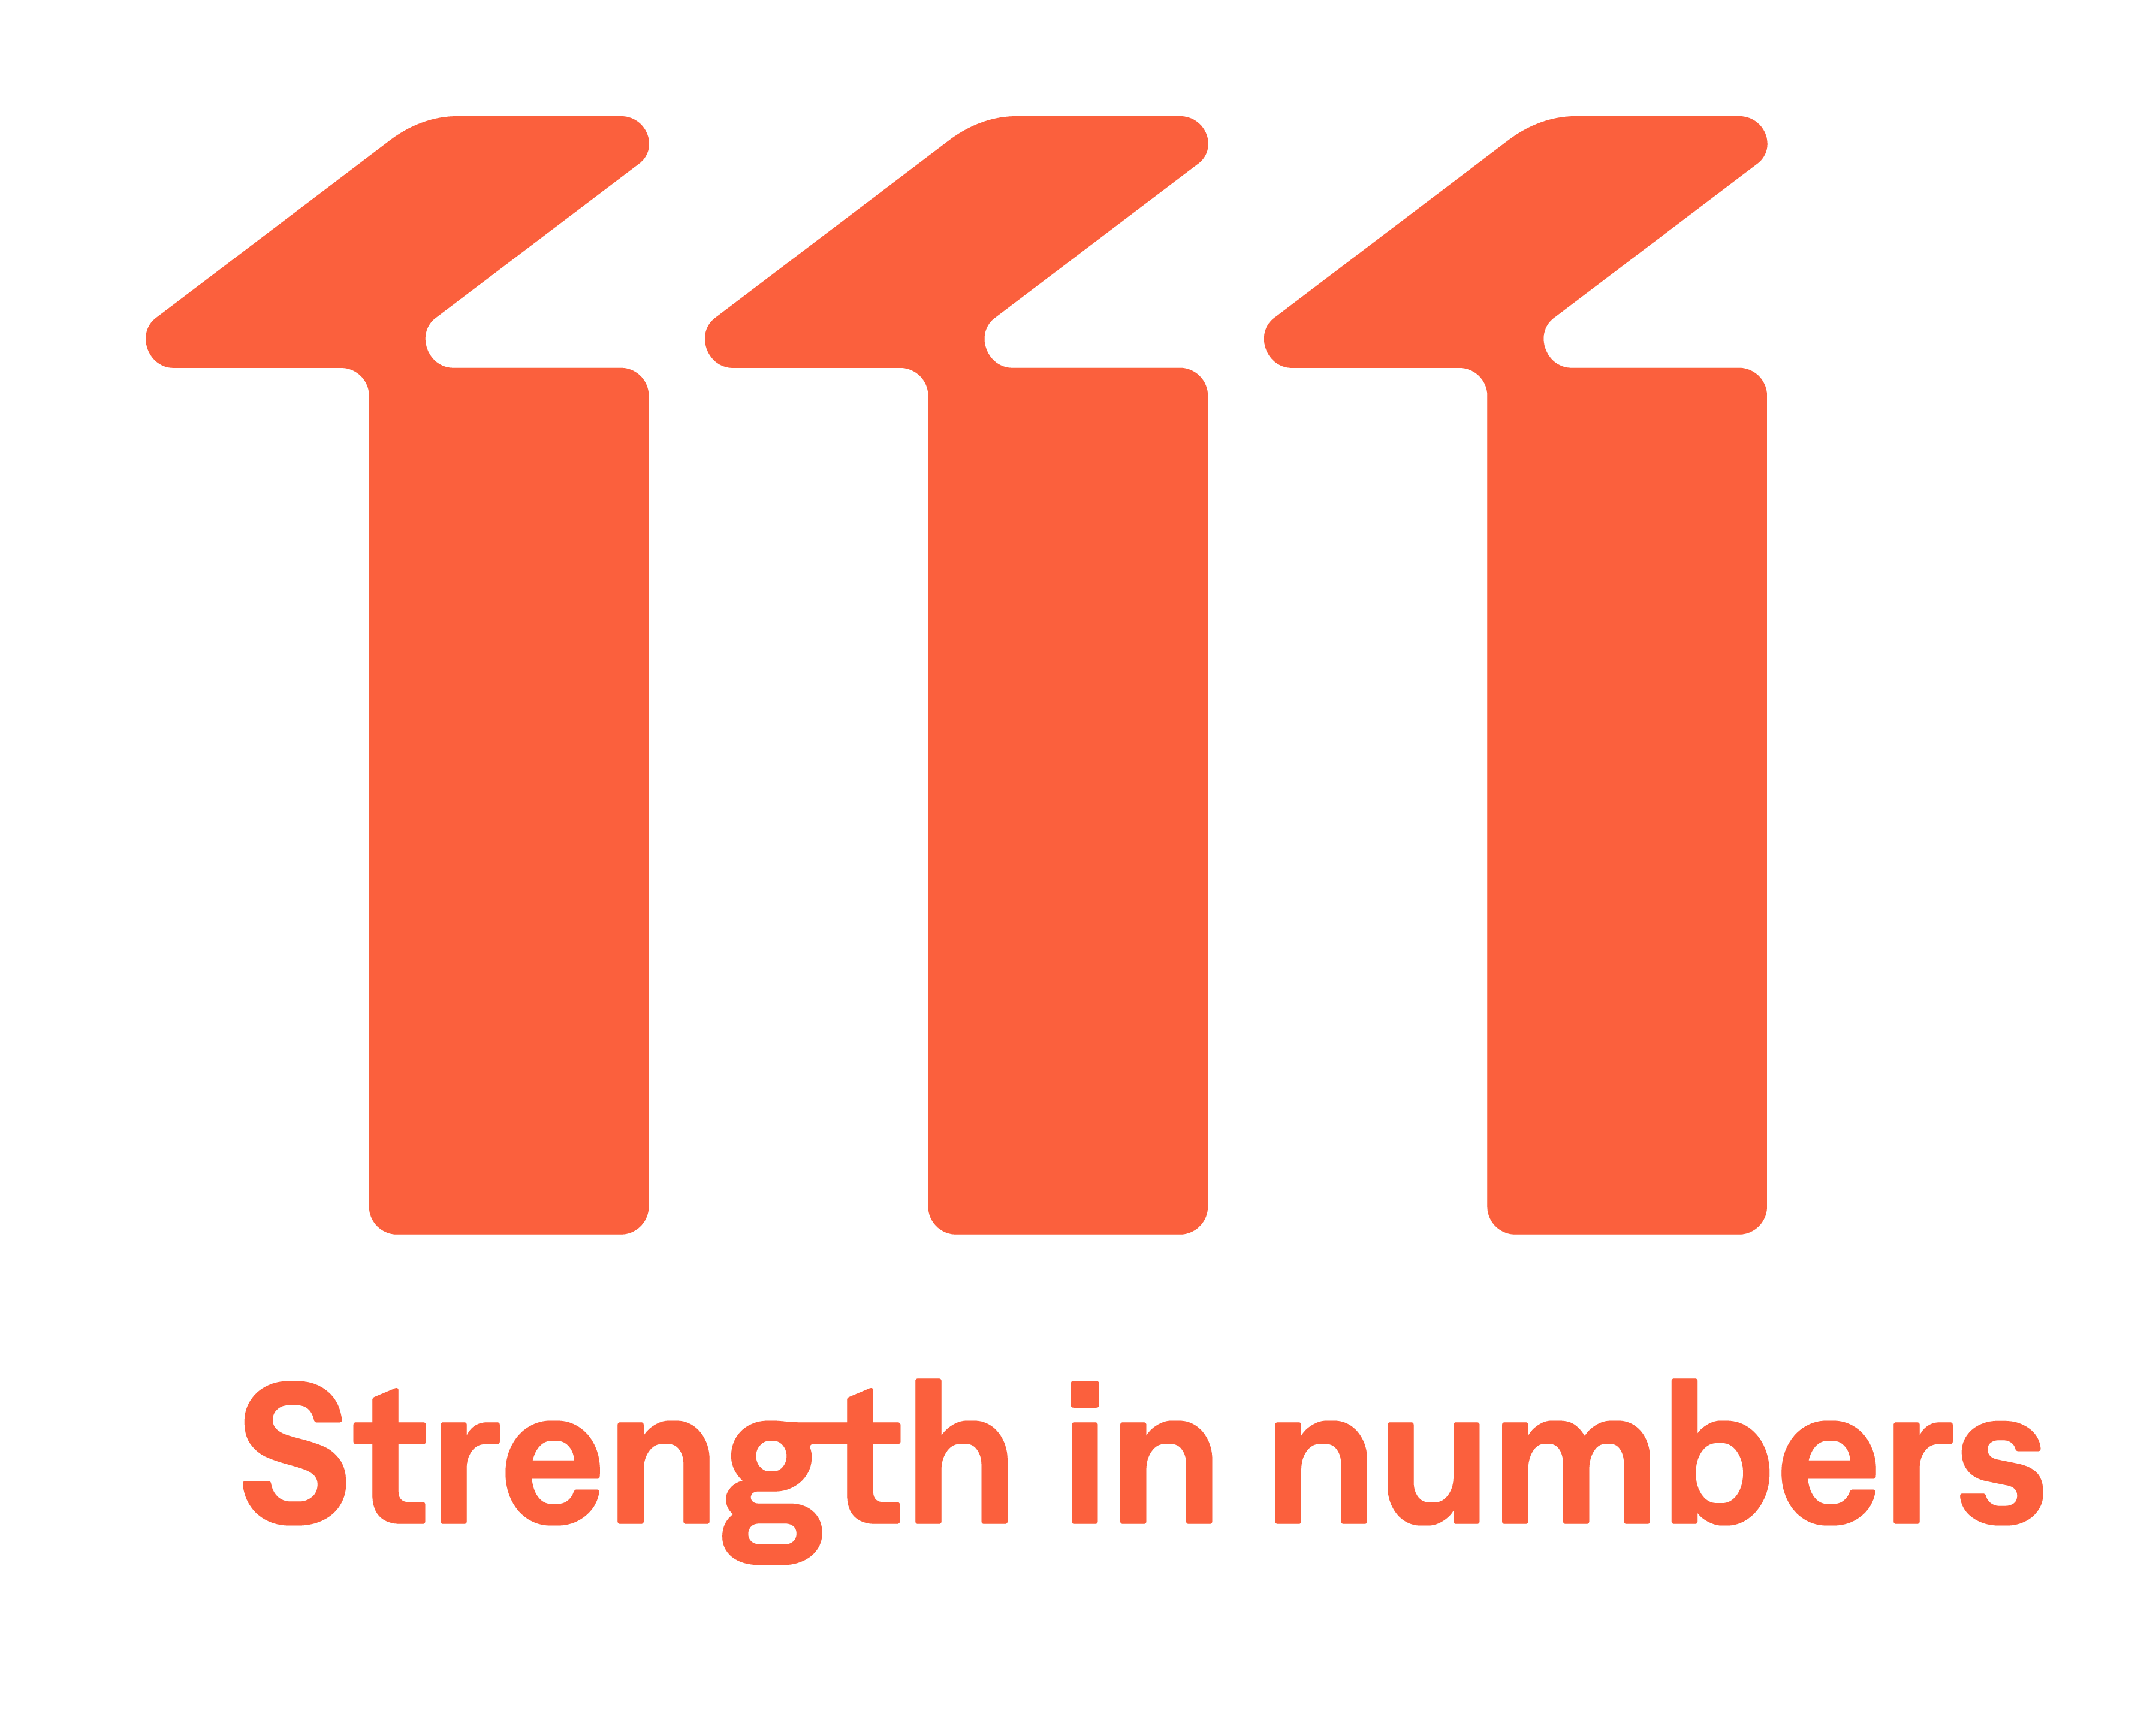 111 strength in numbers